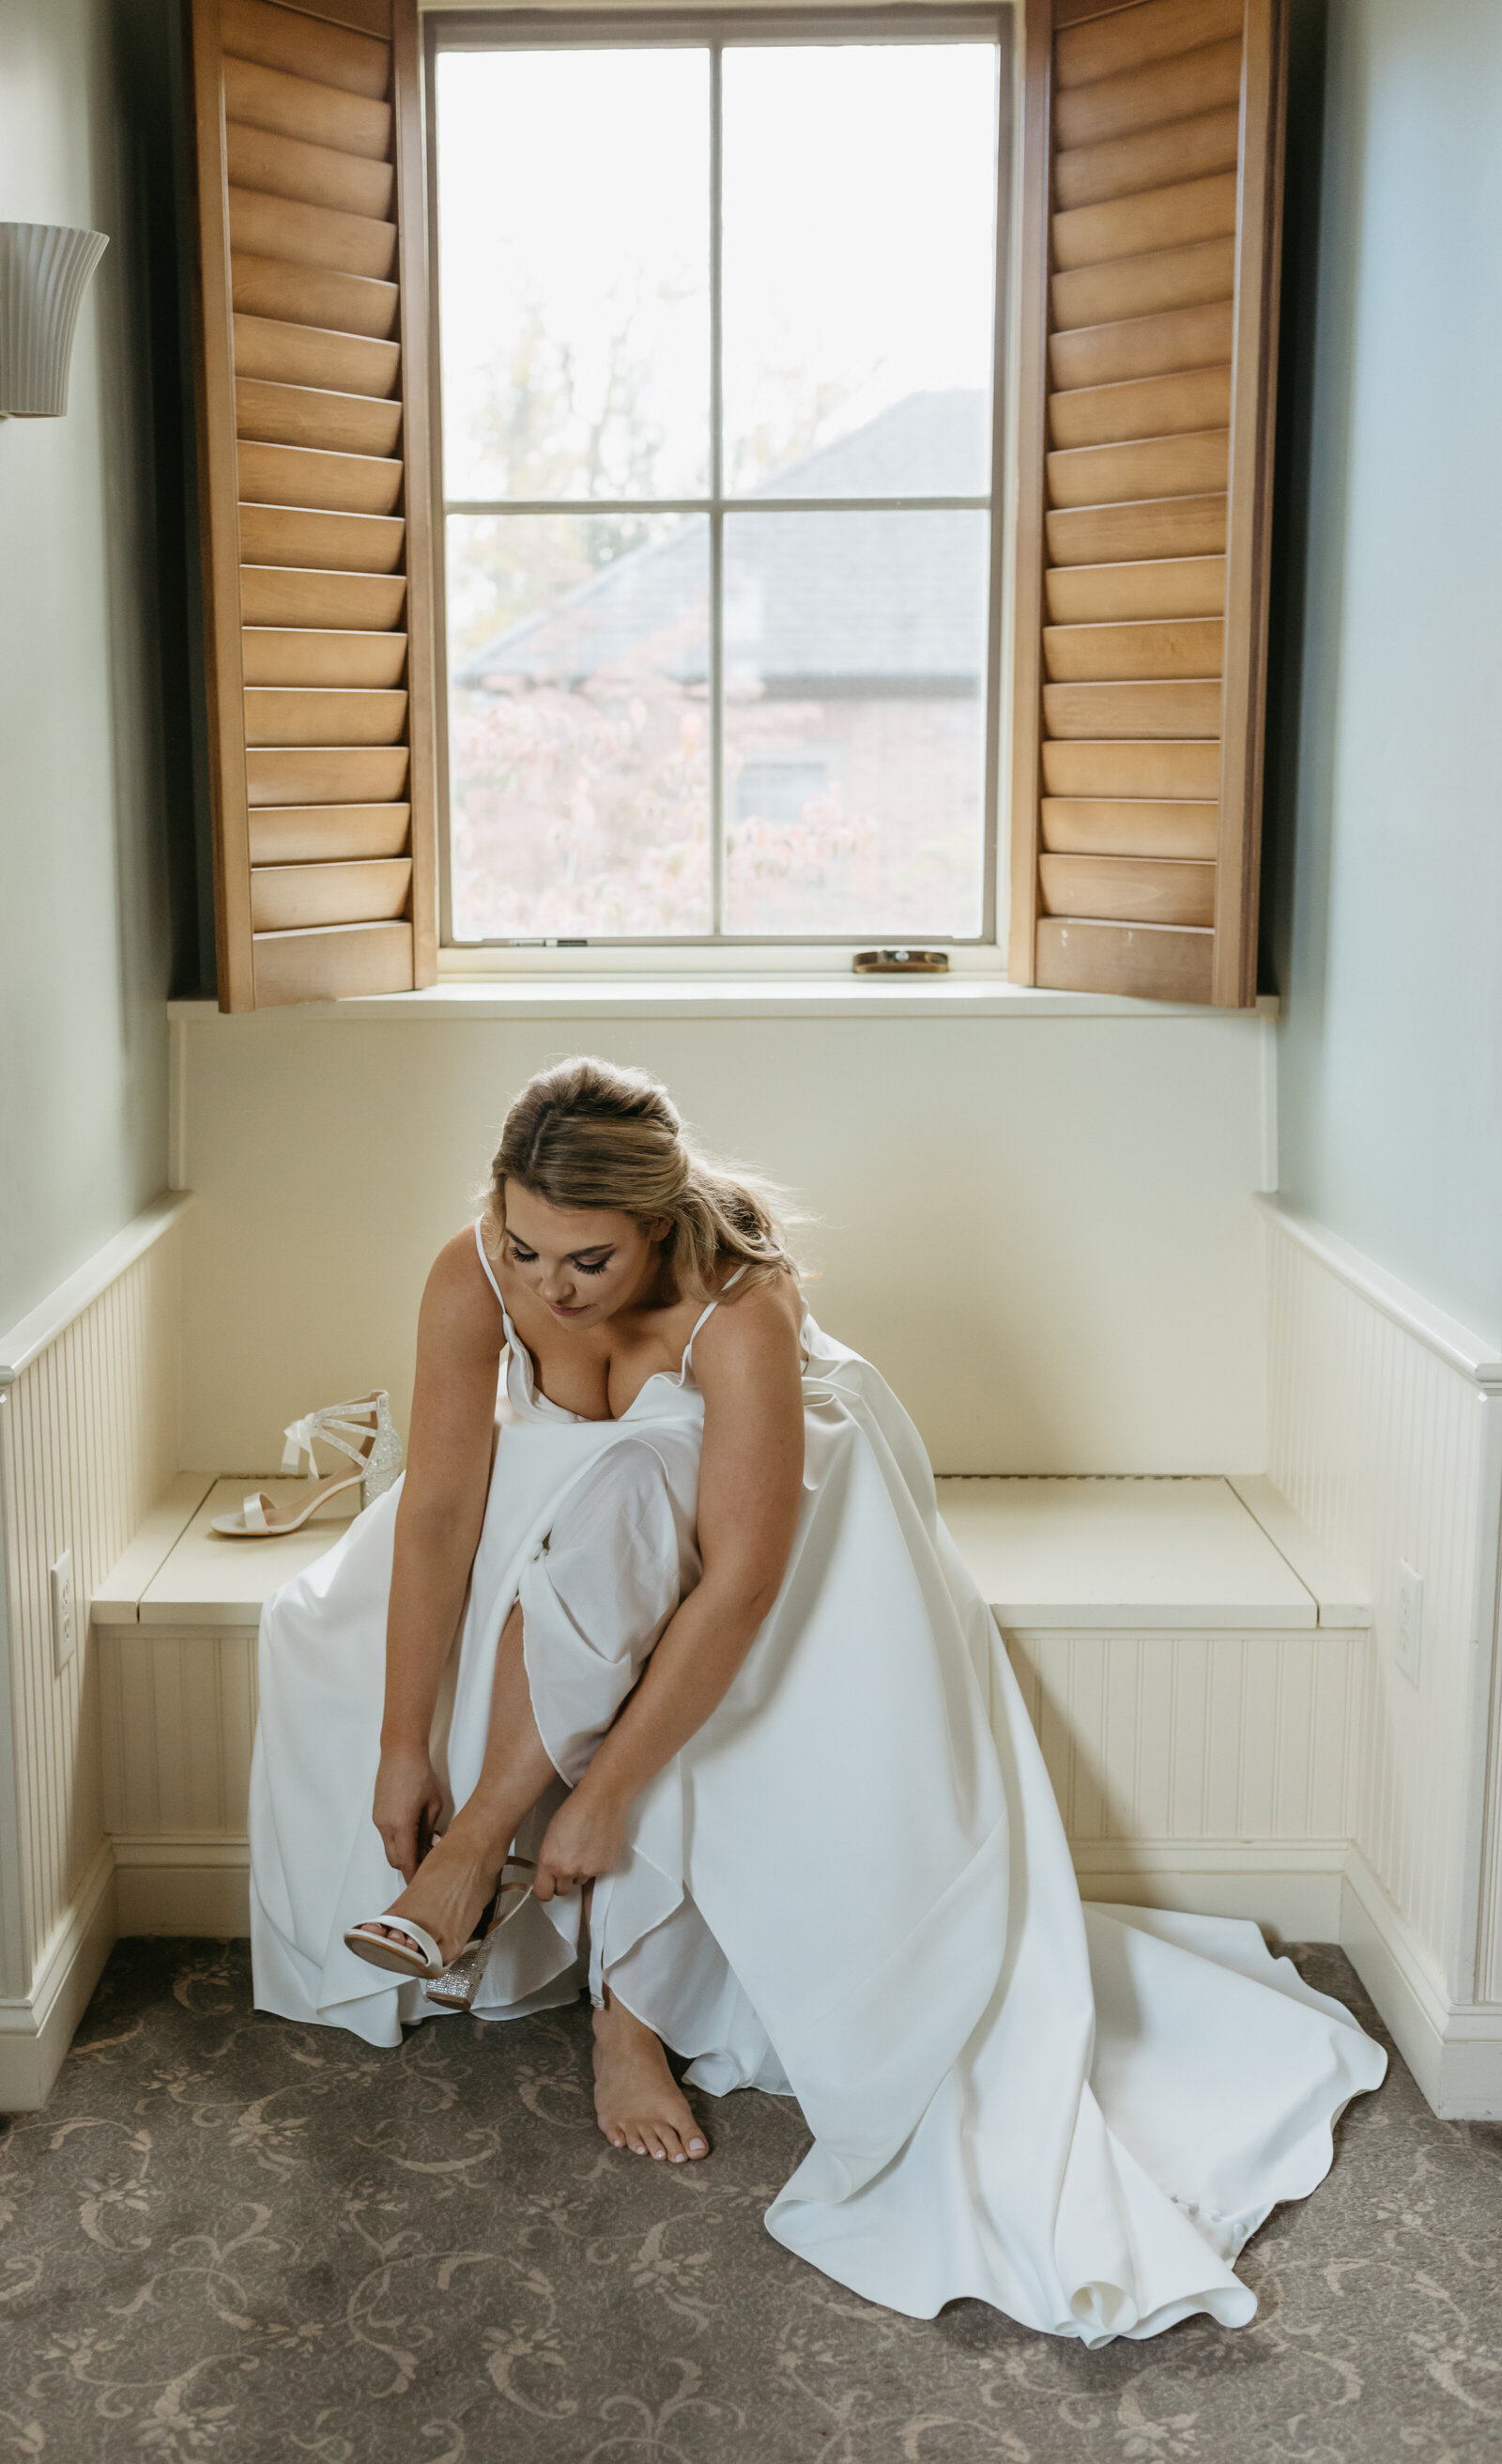 A bride sitting in a window seat fastens her shoes